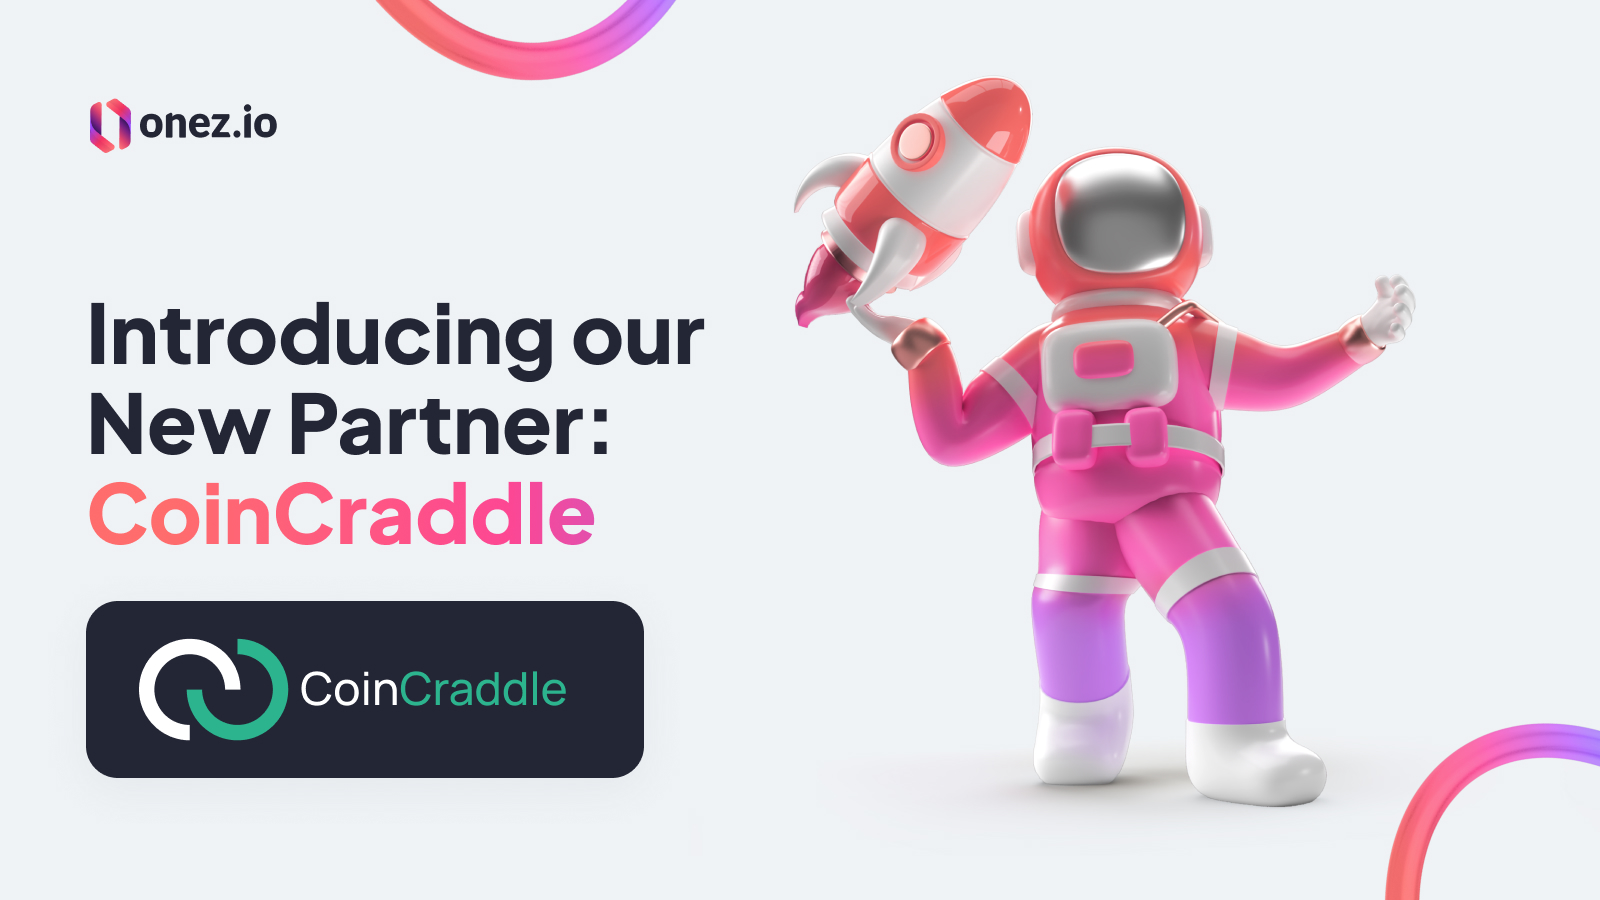 Onez.io has consistently championed innovation in the blockchain and digital asset space. Our commitment to providing top-tier solutions for businesses takes a significant leap forward as we proudly announce our collaboration with CoinCraddle. This partnership is set to enhance our B2B crypto offerings and fortify our white-label wallet capabilities.